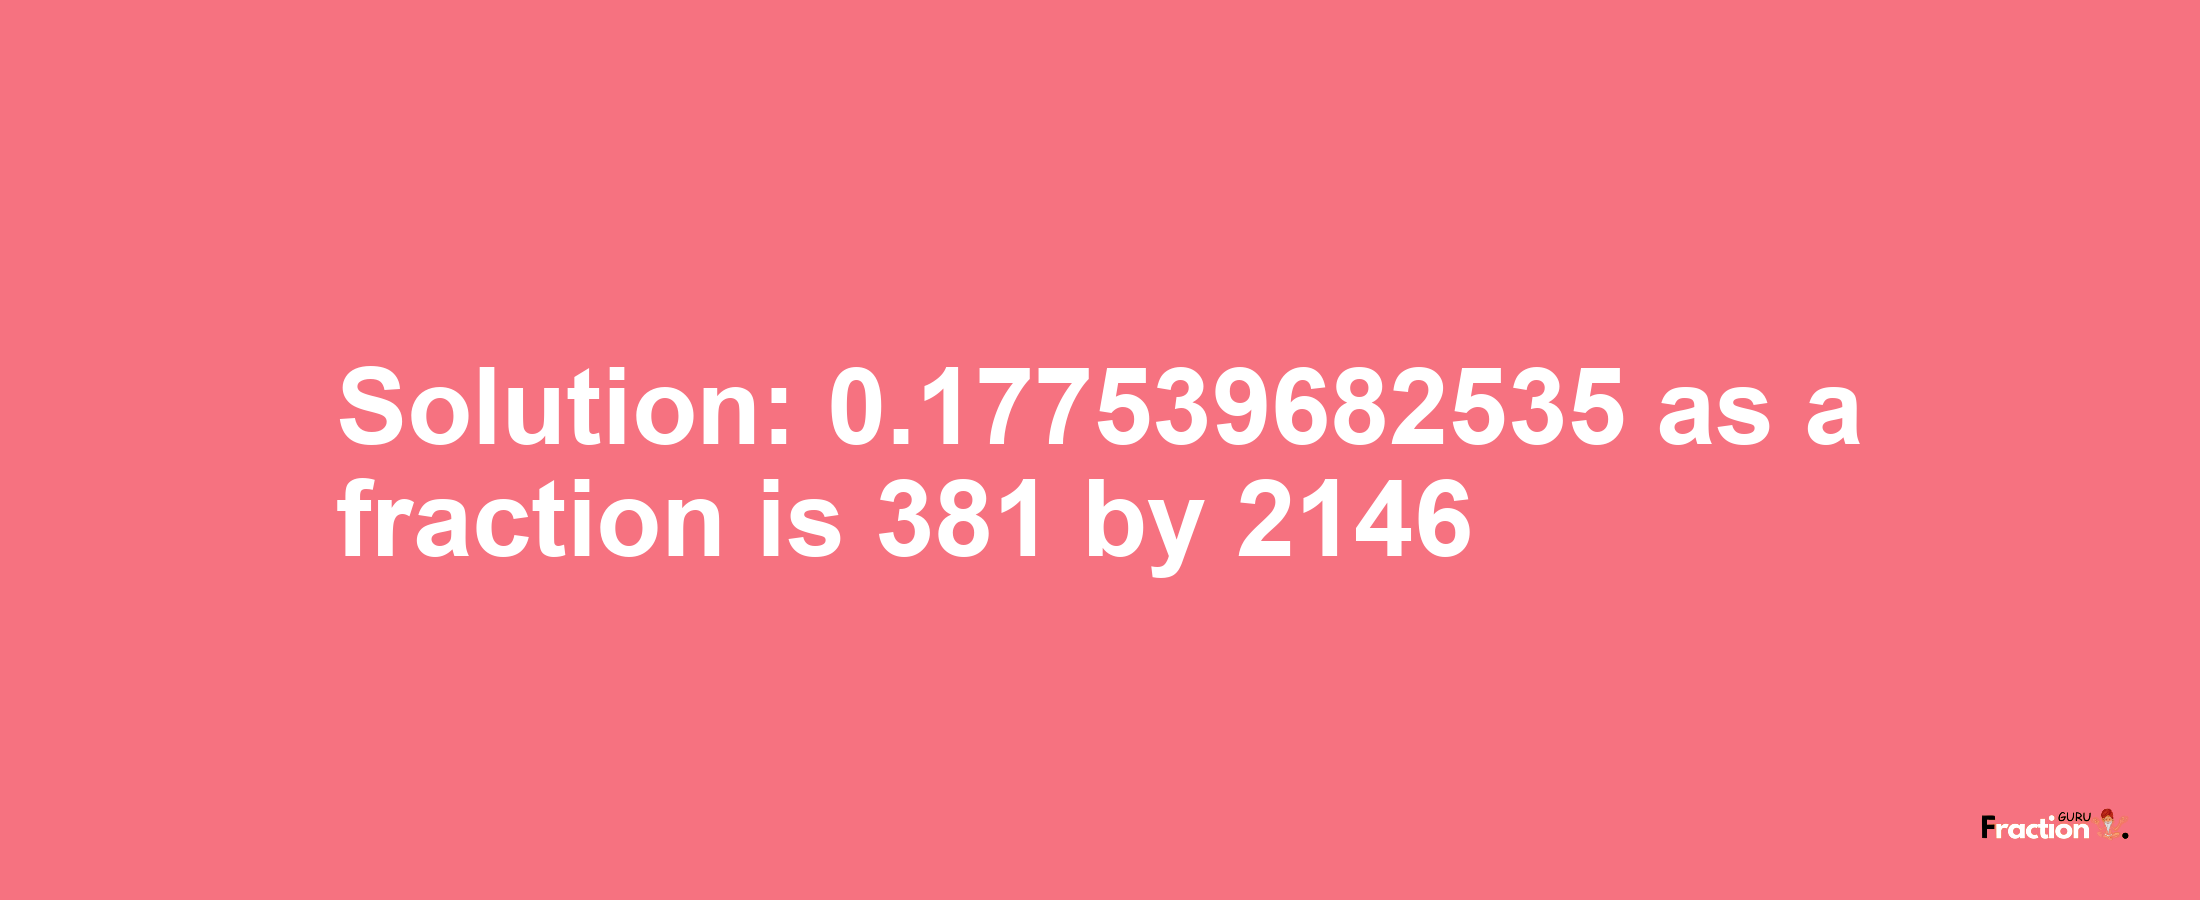 Solution:0.177539682535 as a fraction is 381/2146